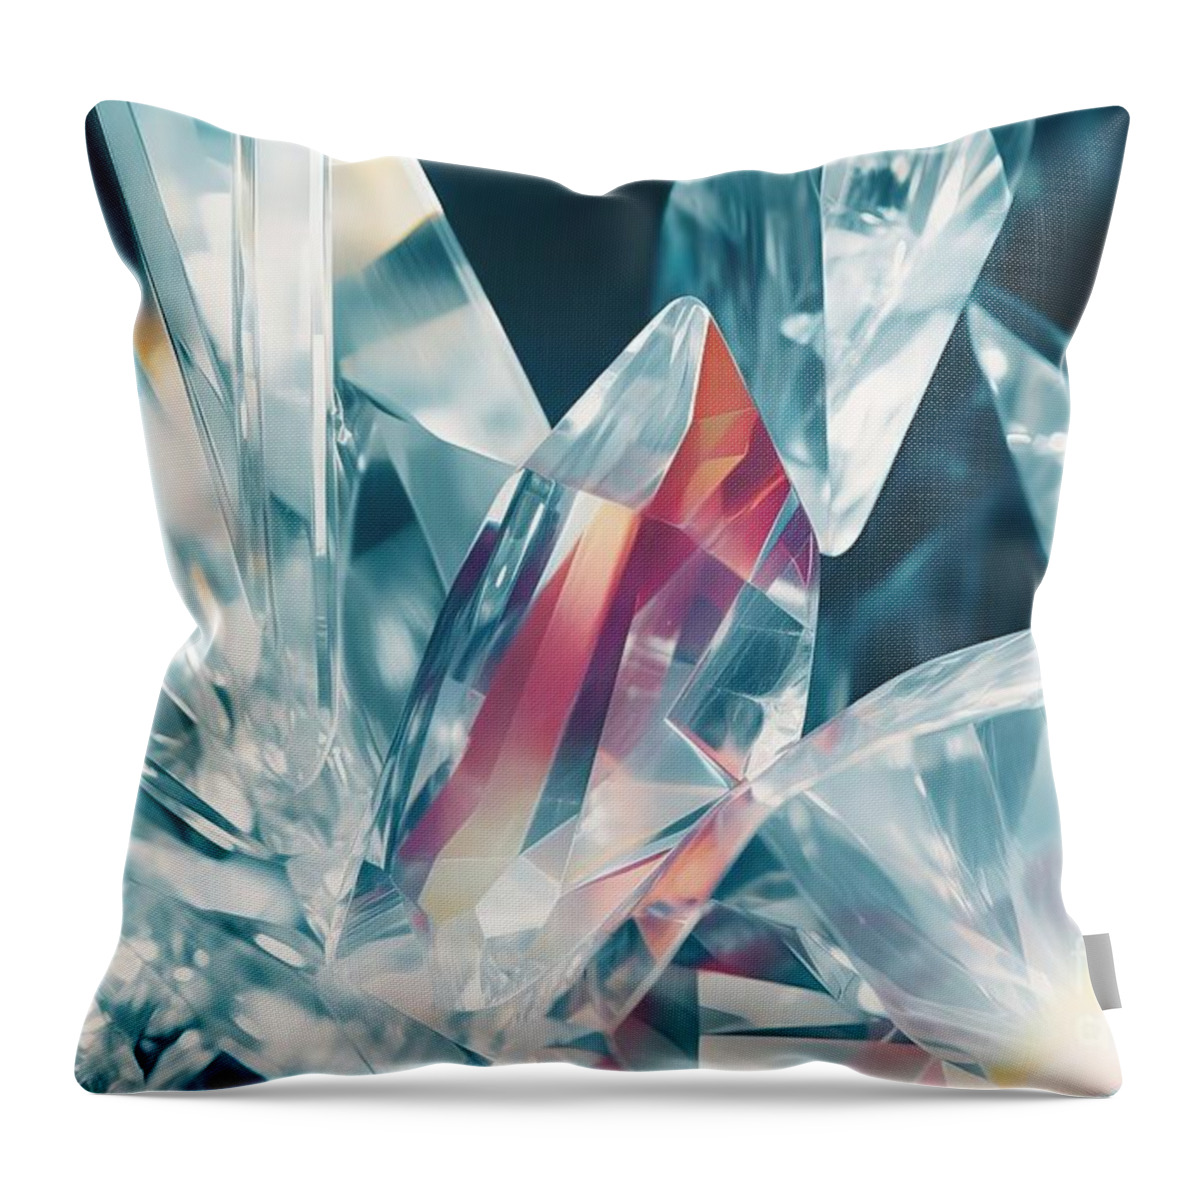 Crystal Throw Pillow featuring the painting Abstract Background Of Crystal Refractions by N Akkash